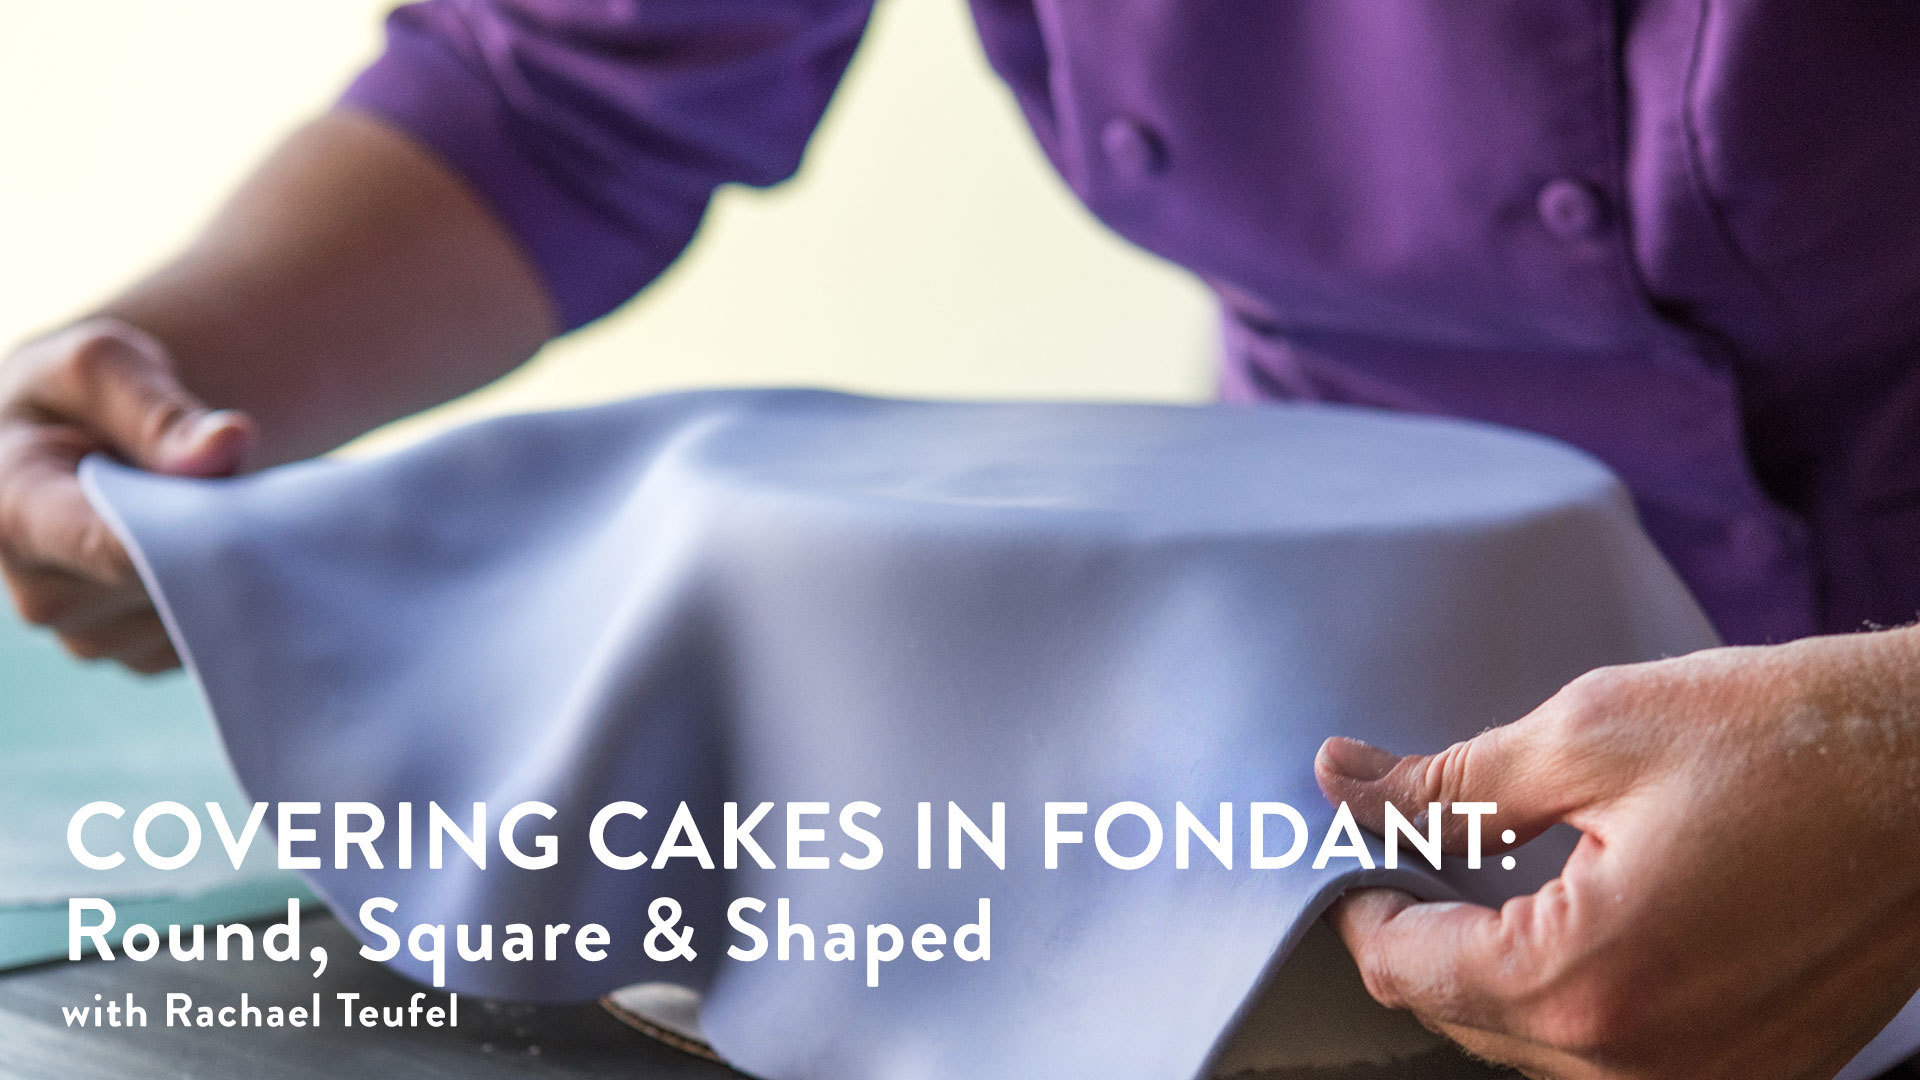 Covering Cakes in Fondant: Round, Square & Shaped | Craftsy